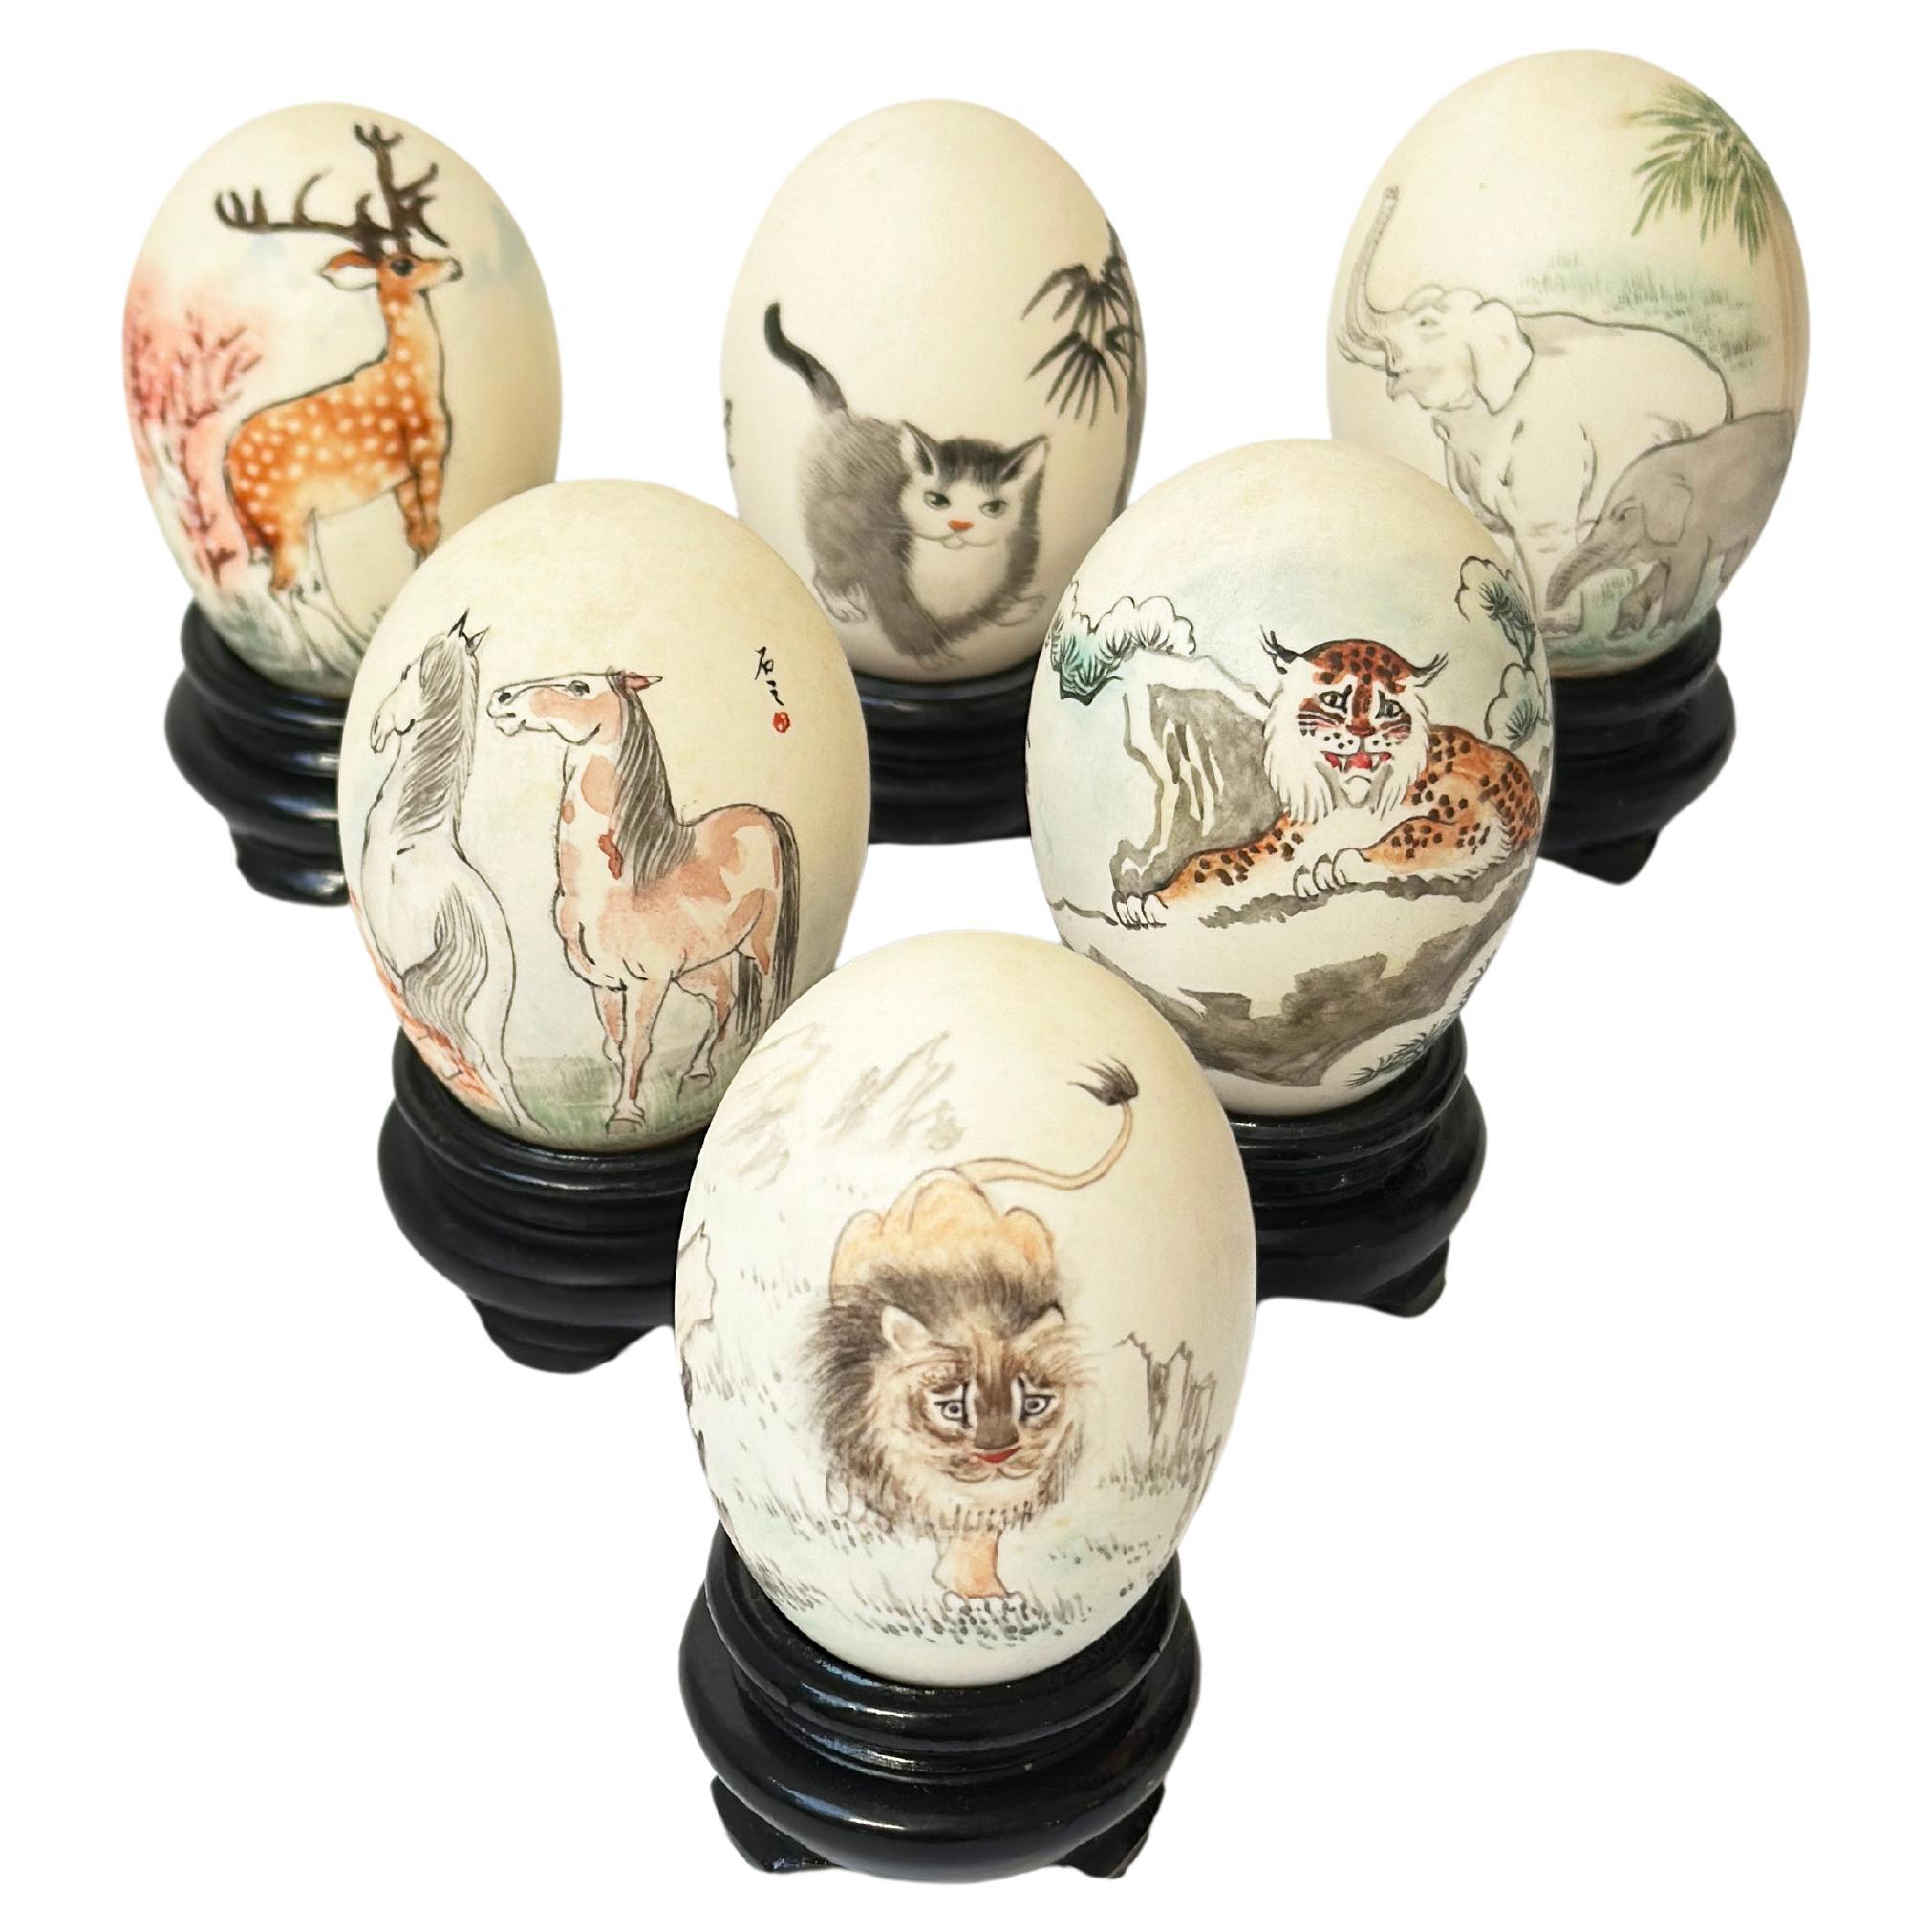 Vintage Chinese Painted Eggshells on Wooden Display Plinths - Set of 6 For Sale